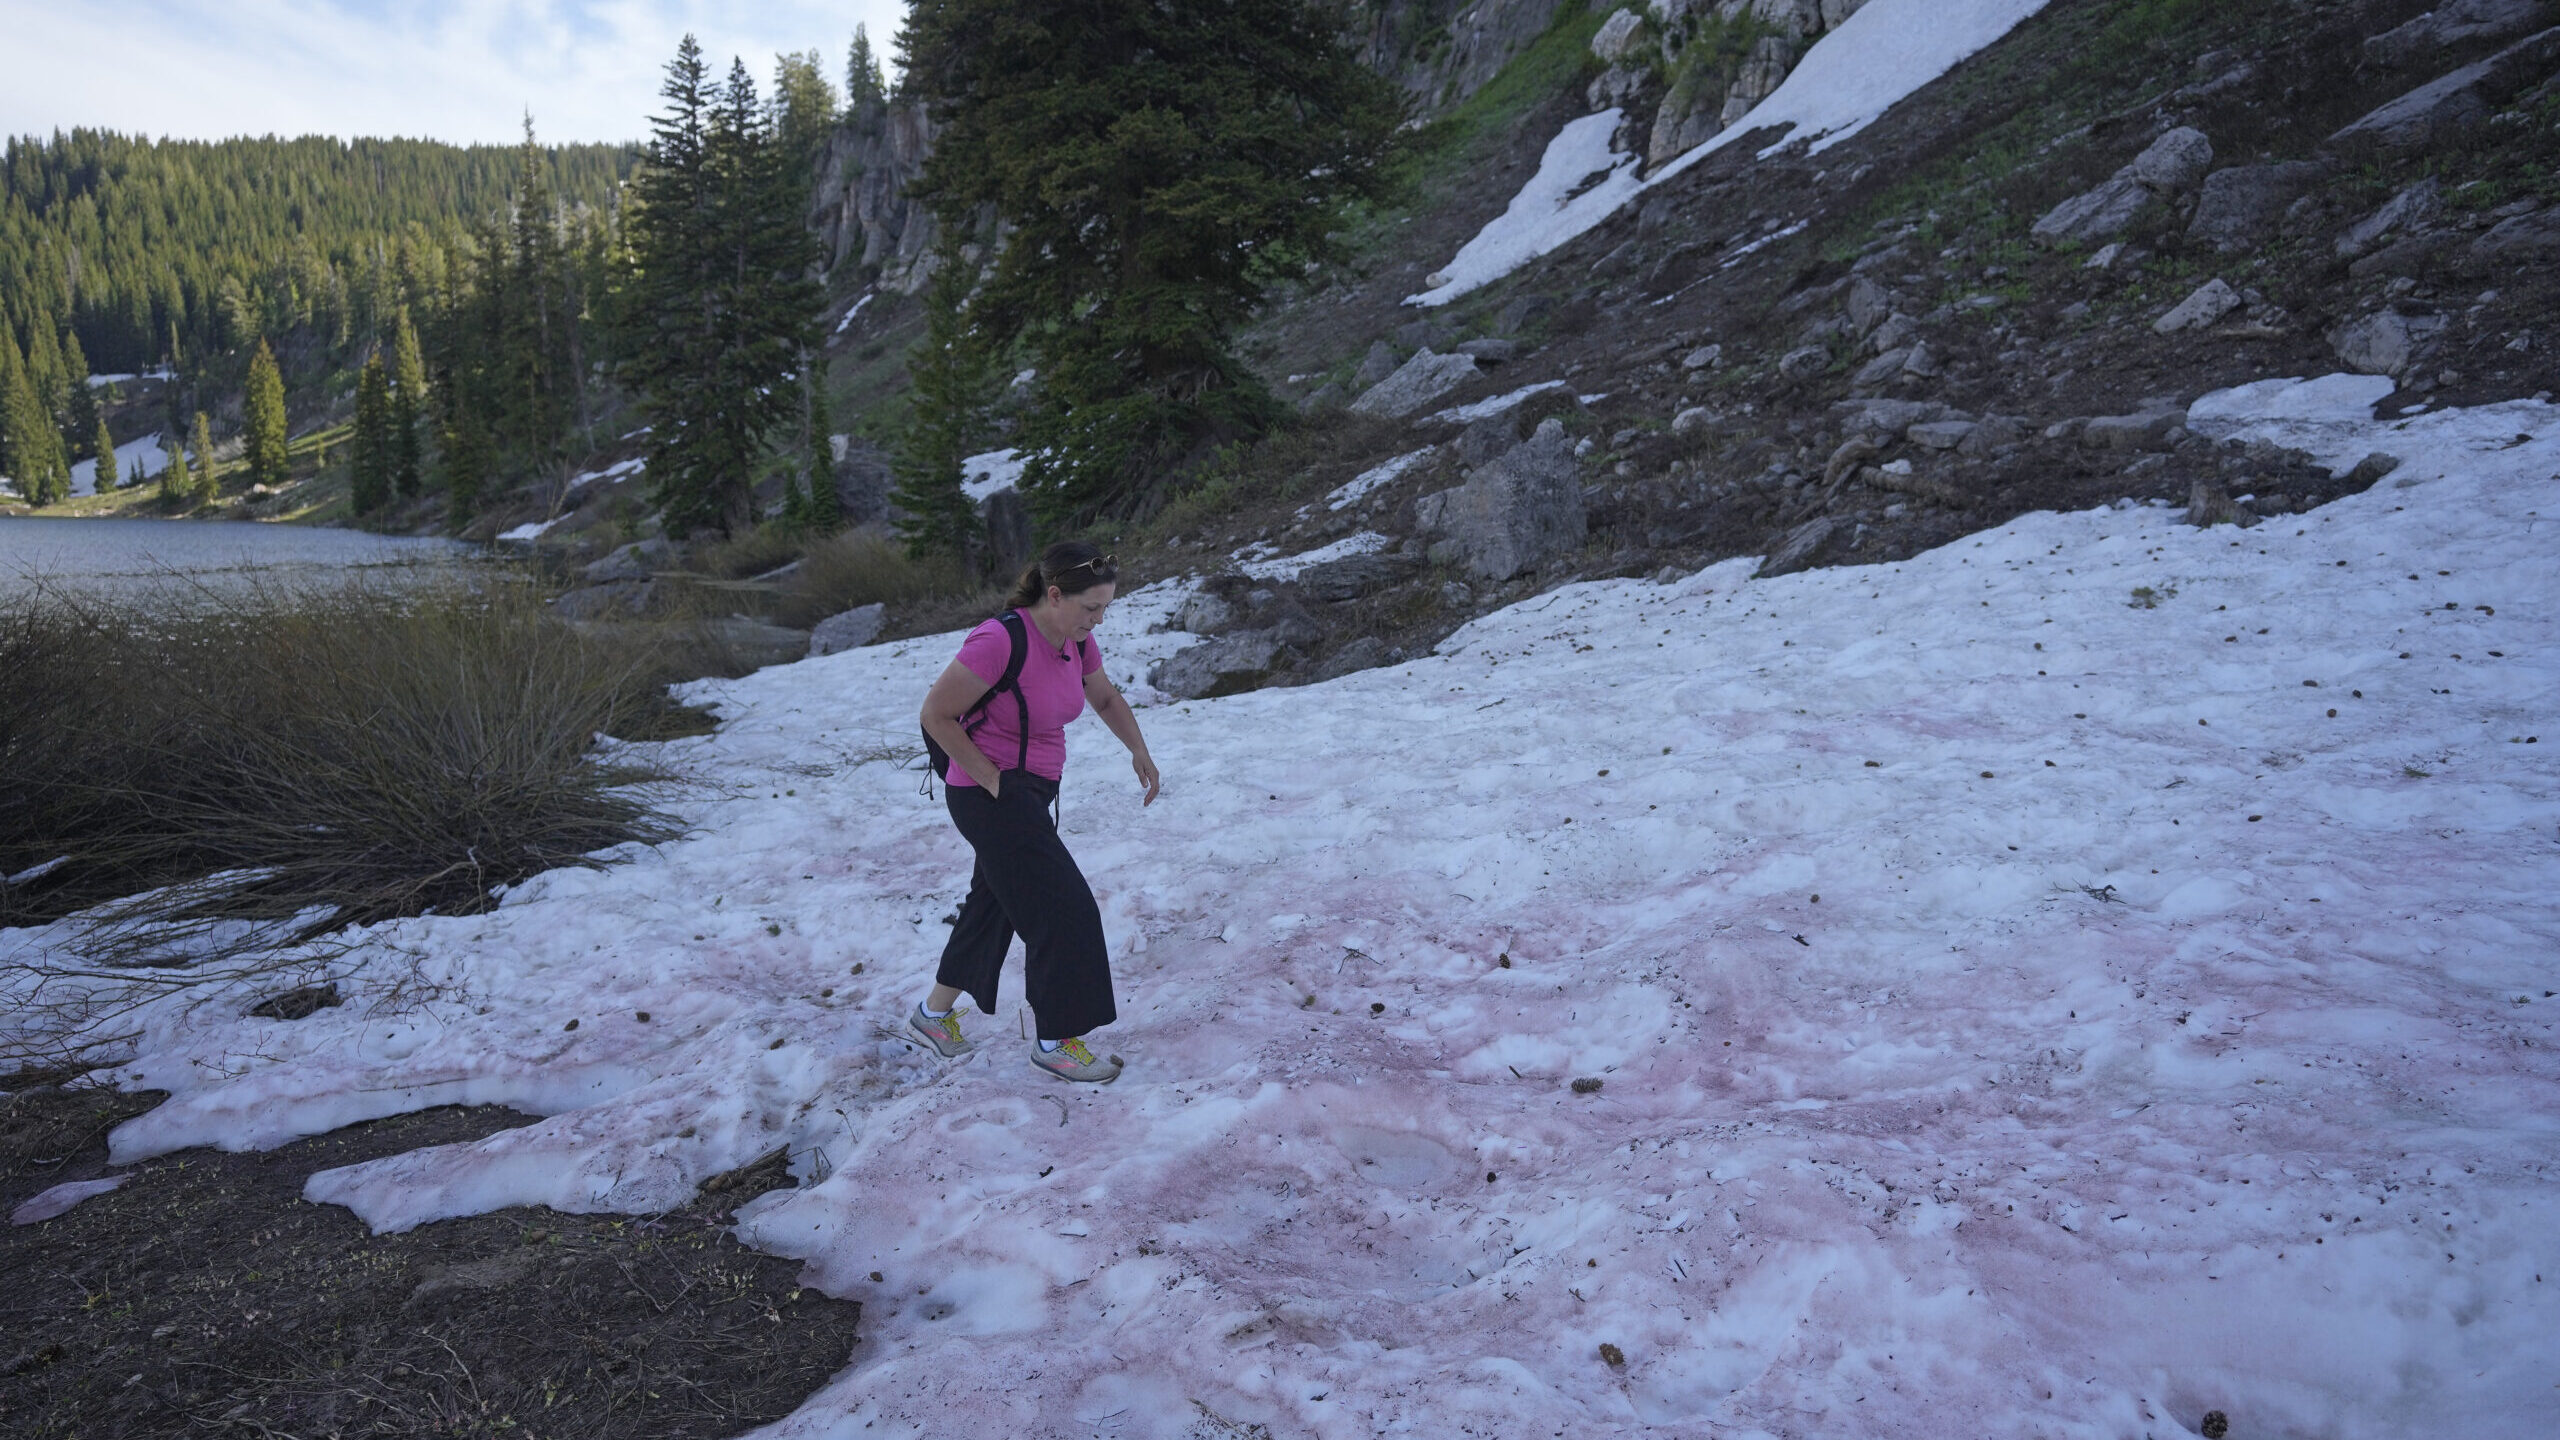 Watermelon snow in Utah! High up in the mountains, amid pinyon pine and quaking aspen trees, the re...